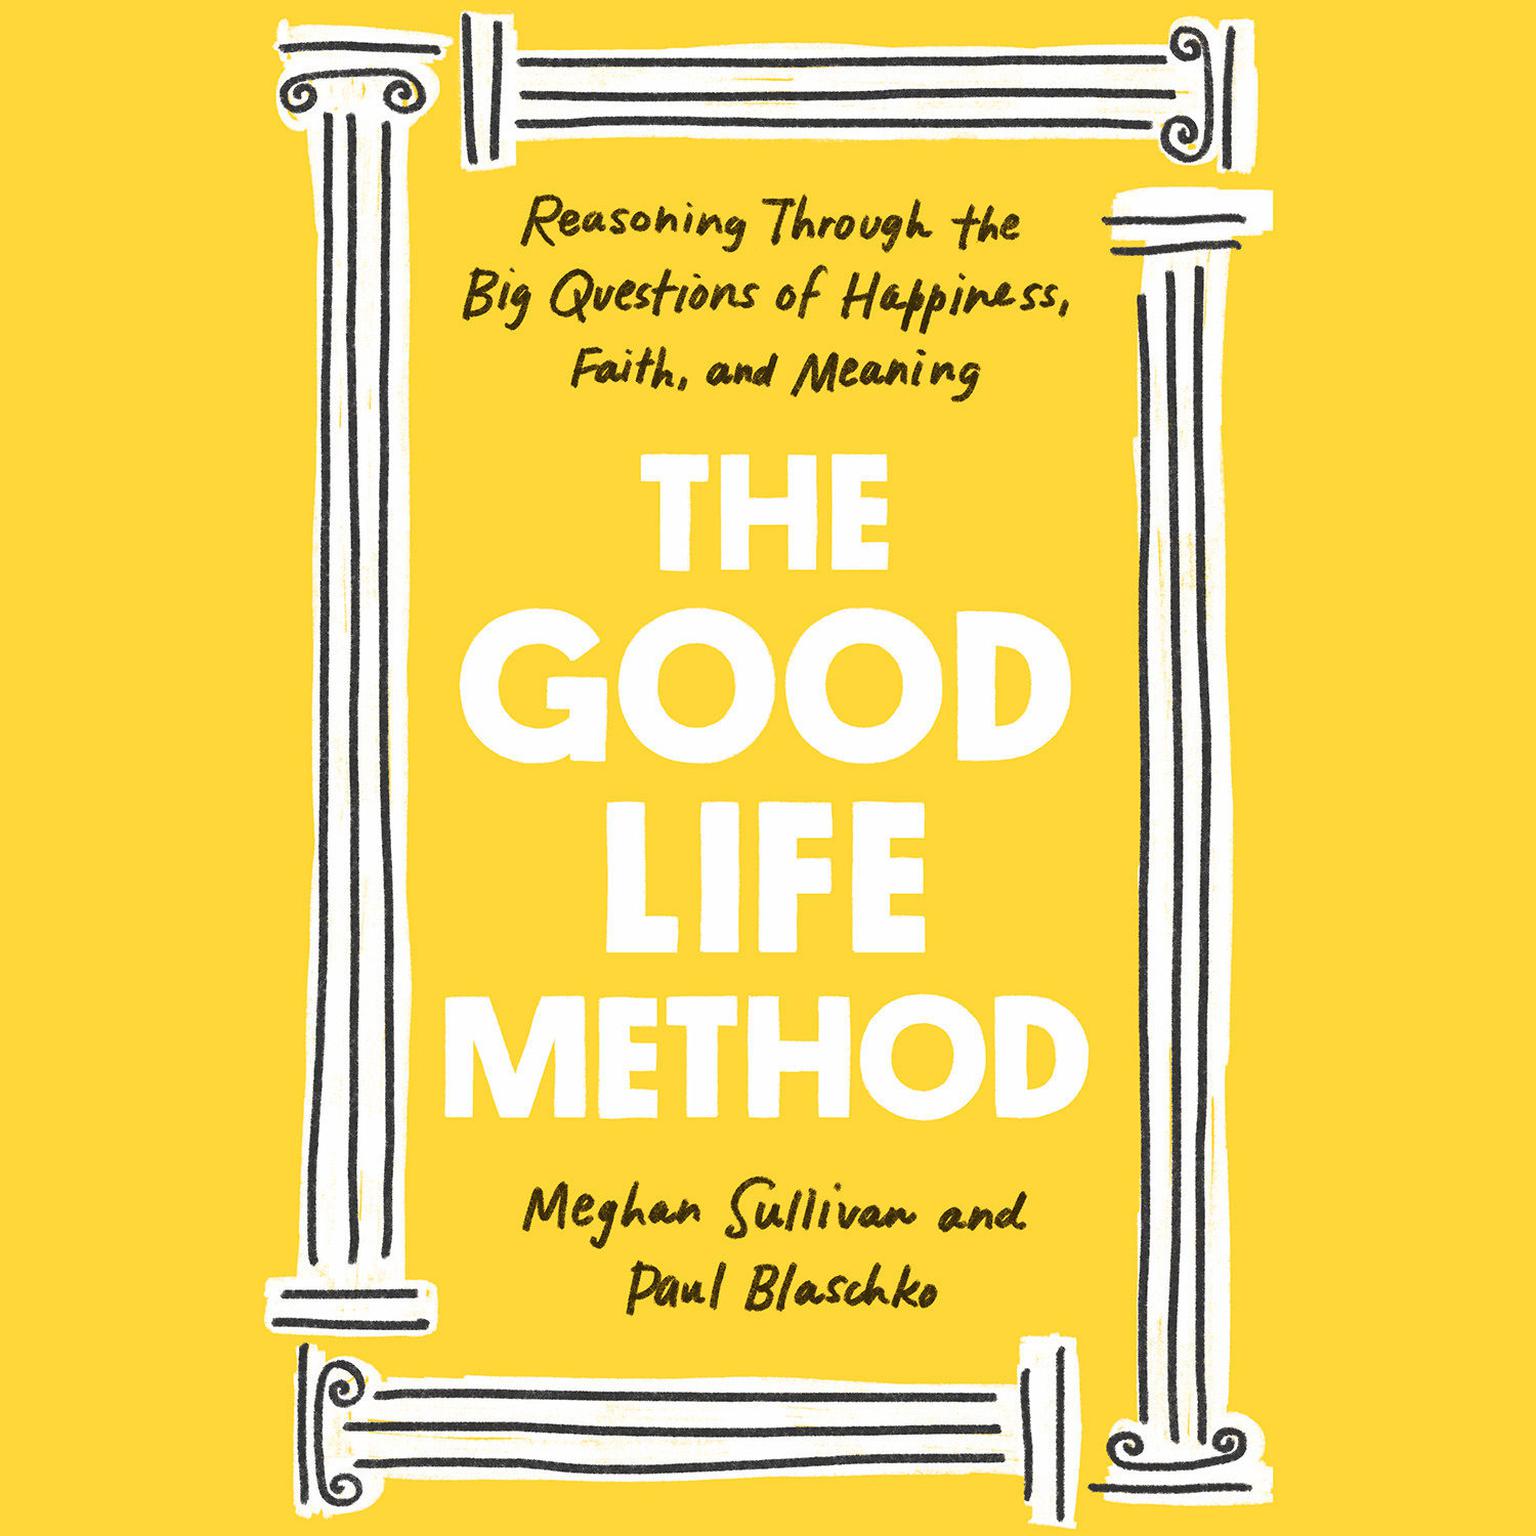 The Good Life Method: Reasoning Through the Big Questions of Happiness, Faith, and Meaning Audiobook, by Paul Blaschko